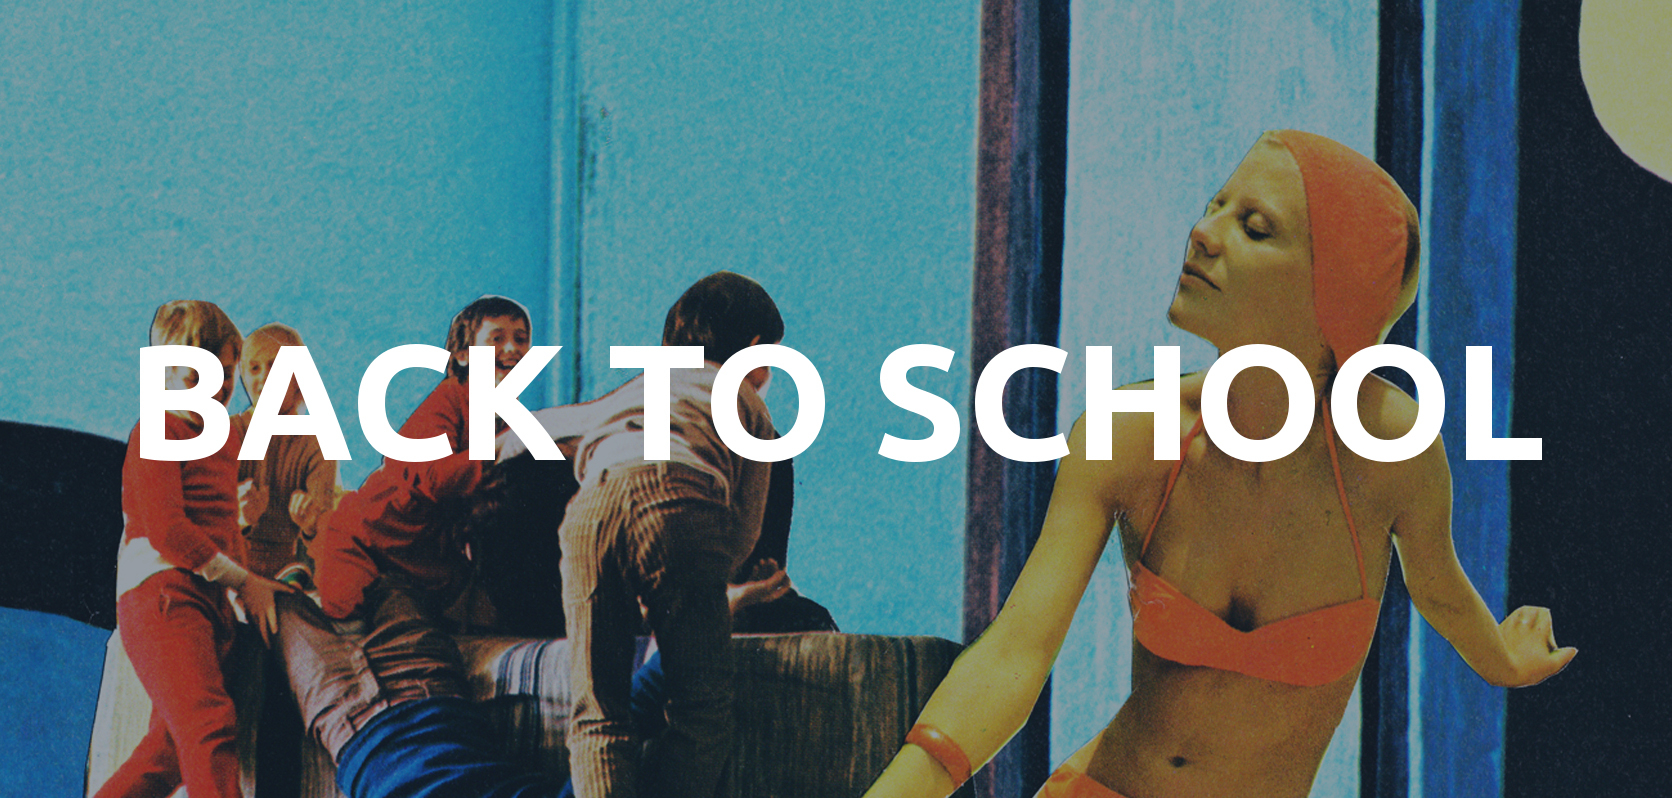 Last minute back to school content marketing